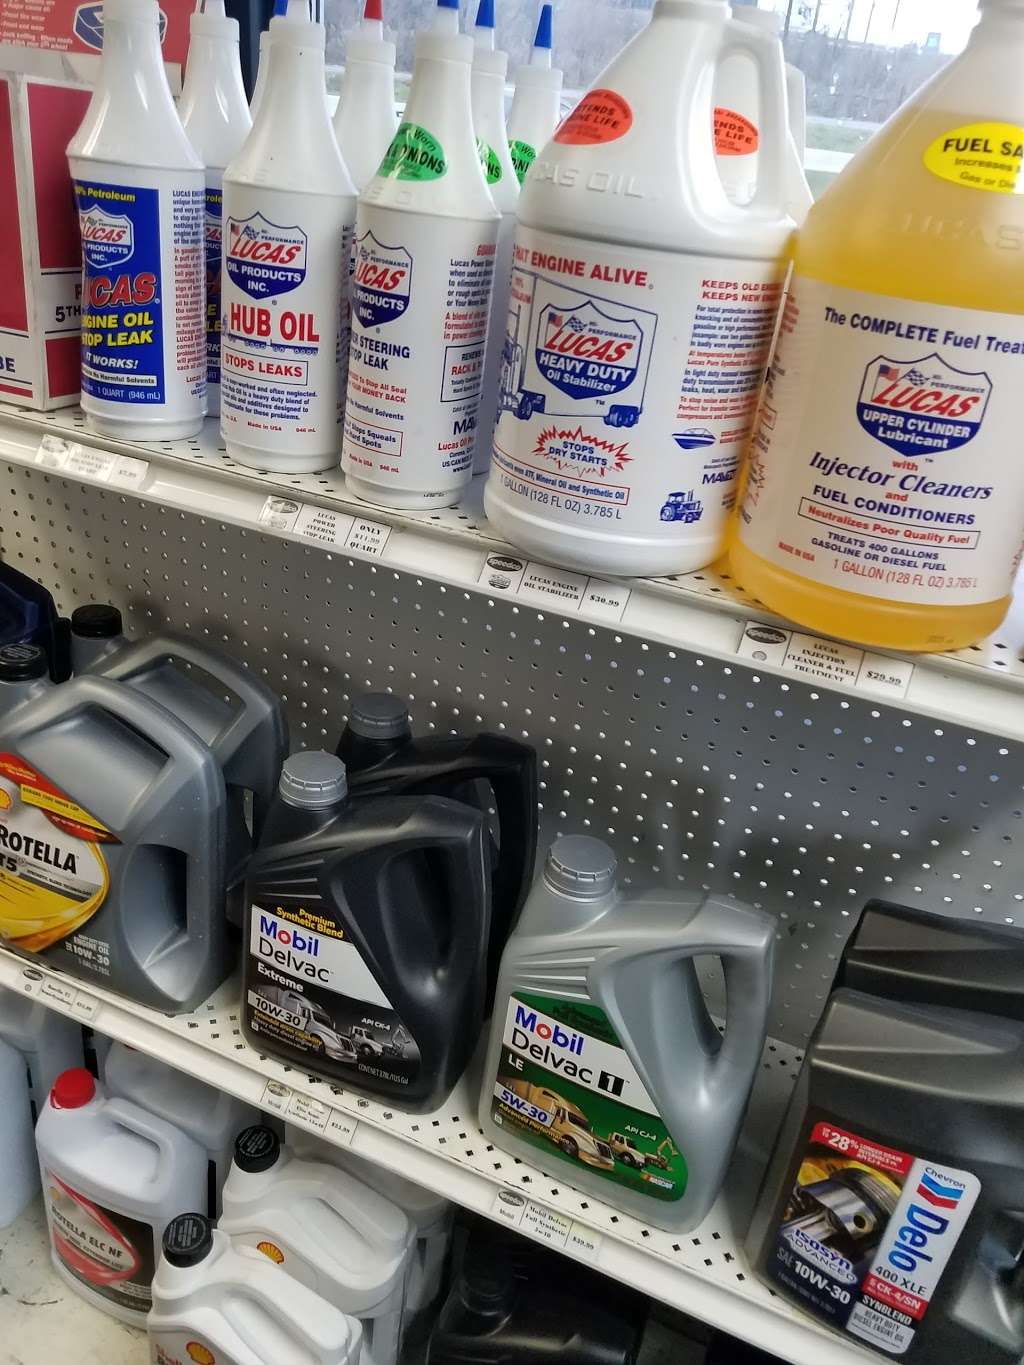 Speedco Truck Lube and Tires | 5225 W 26th Ave, Gary, IN 46406 | Phone: (219) 844-0484